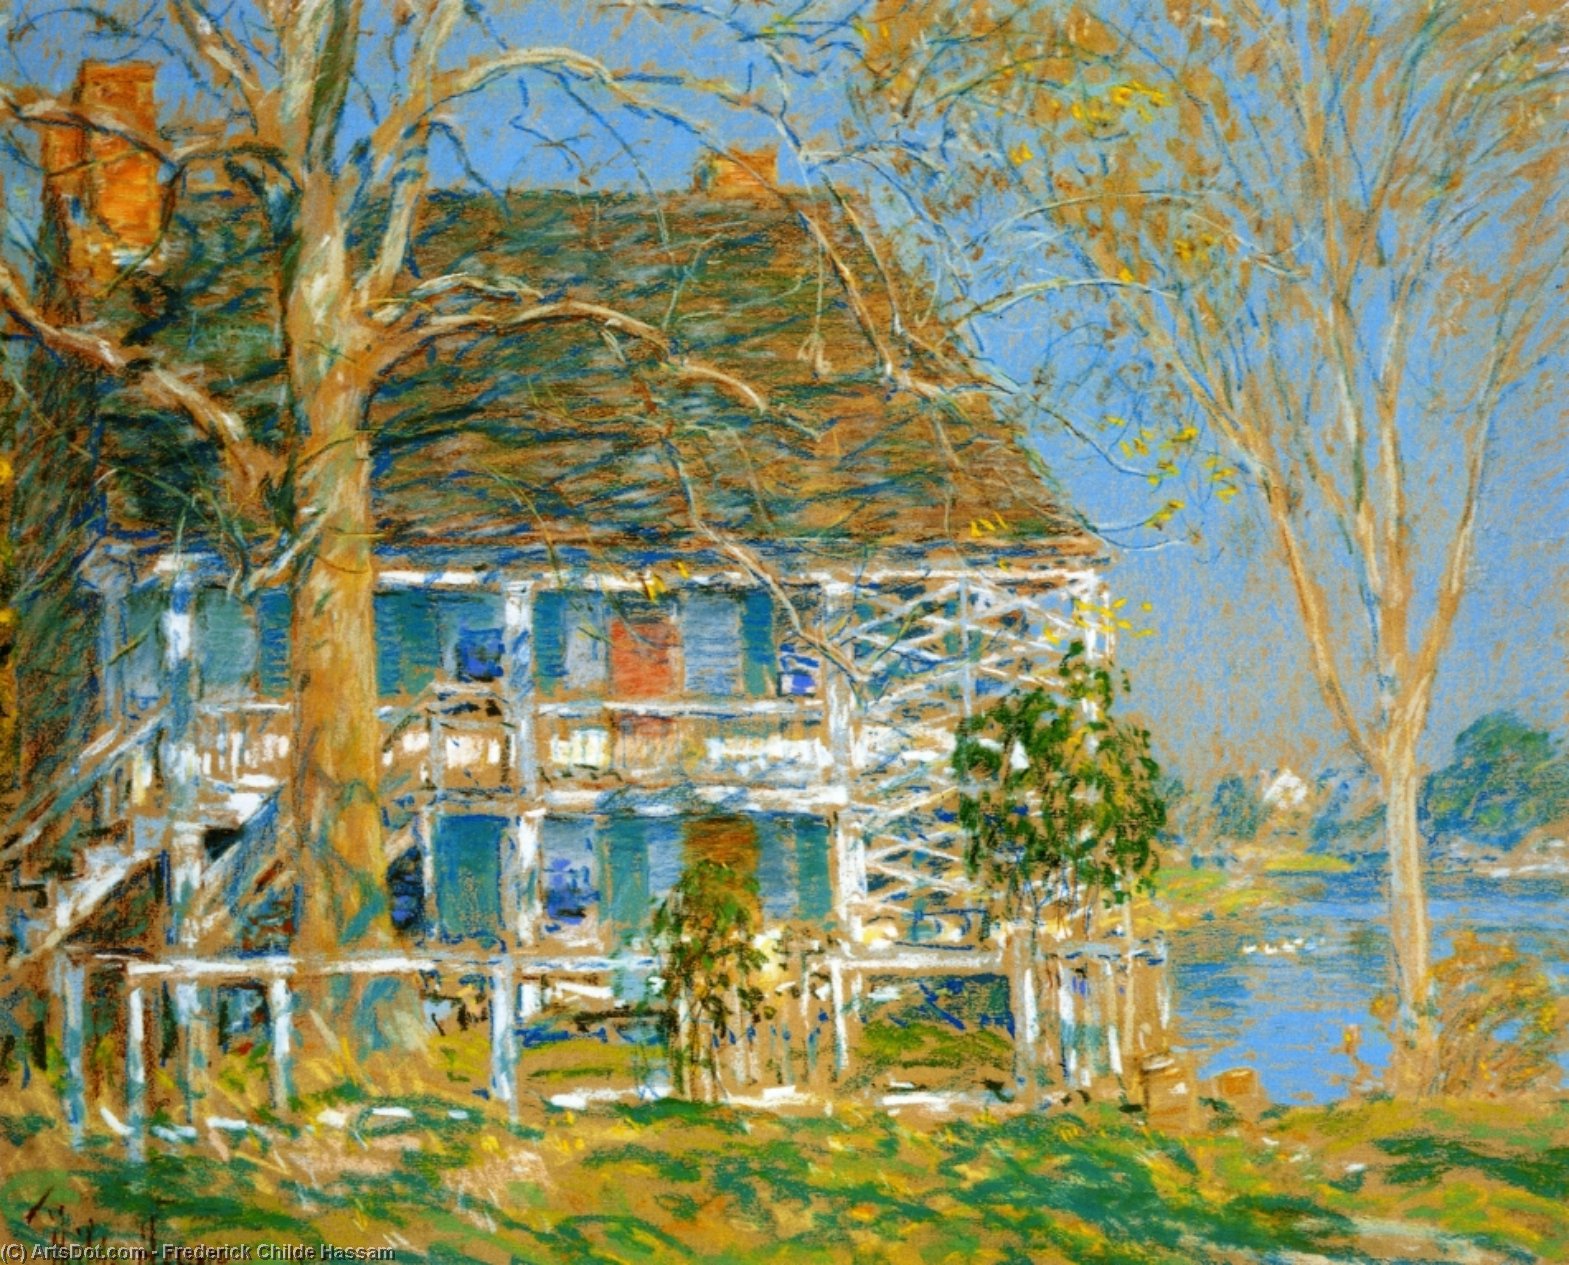 Buy Museum Art Reproductions Unknown (also known as The Old Brush House), 1902 by Frederick Childe Hassam (1859-1935, United States) | ArtsDot.com